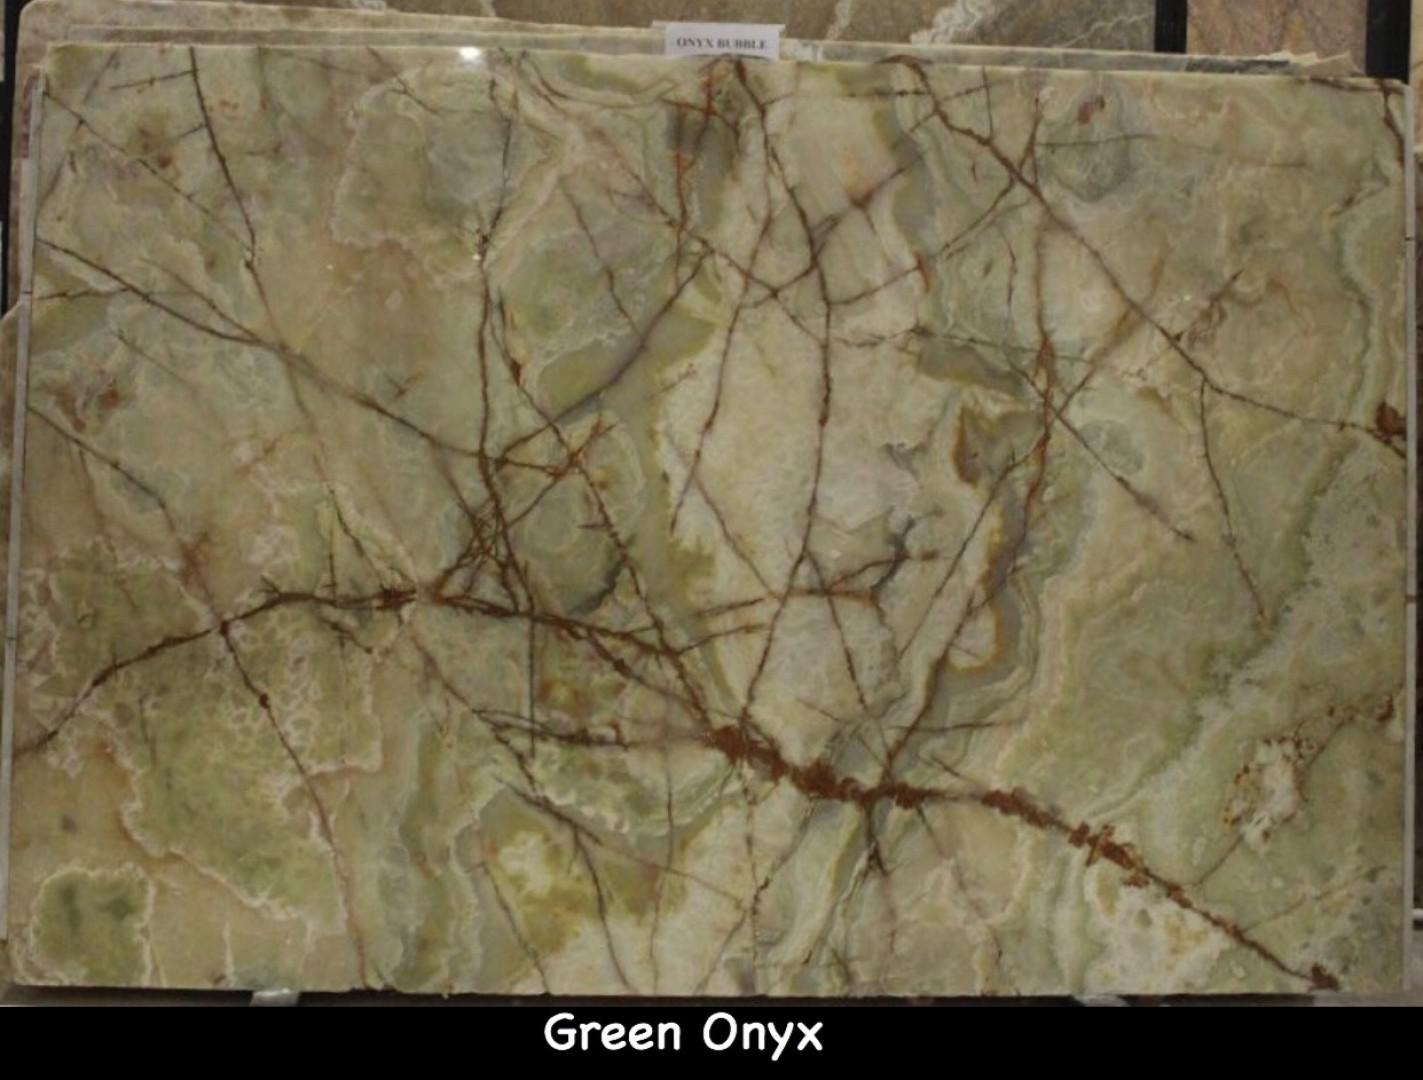 Green Onyx from JSP